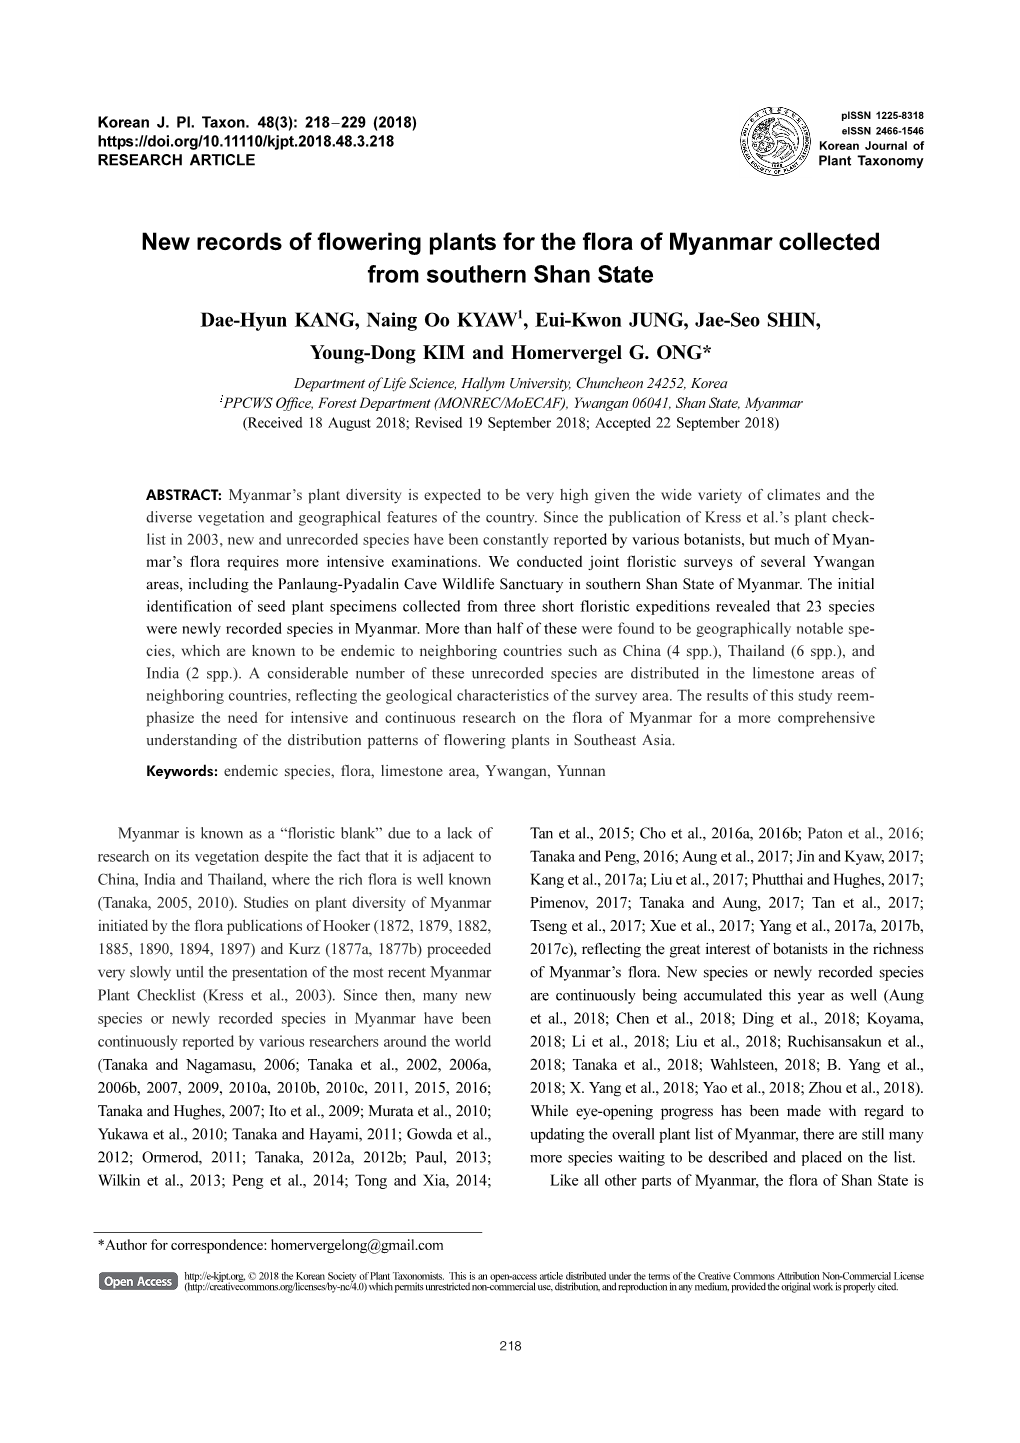 New Records of Flowering Plants for the Flora of Myanmar Collected from Southern Shan State